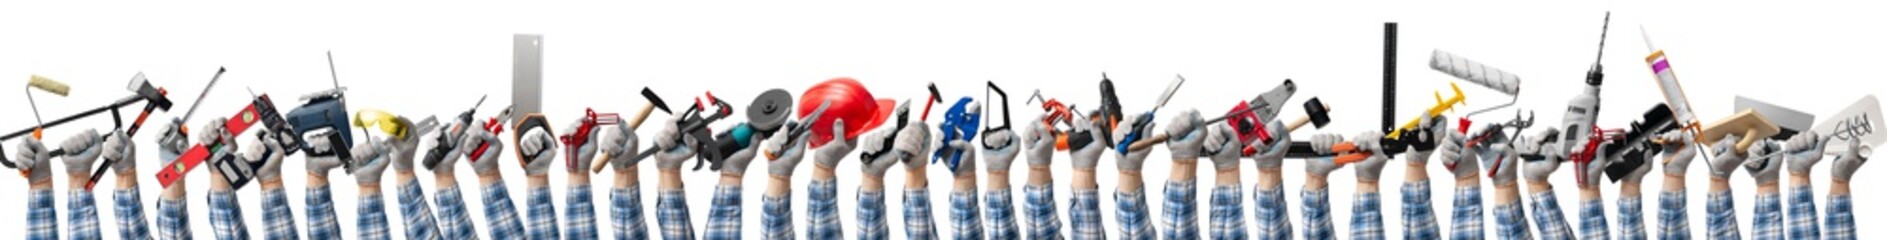 group of hands holds a construction tools for woodworking, construction and repair